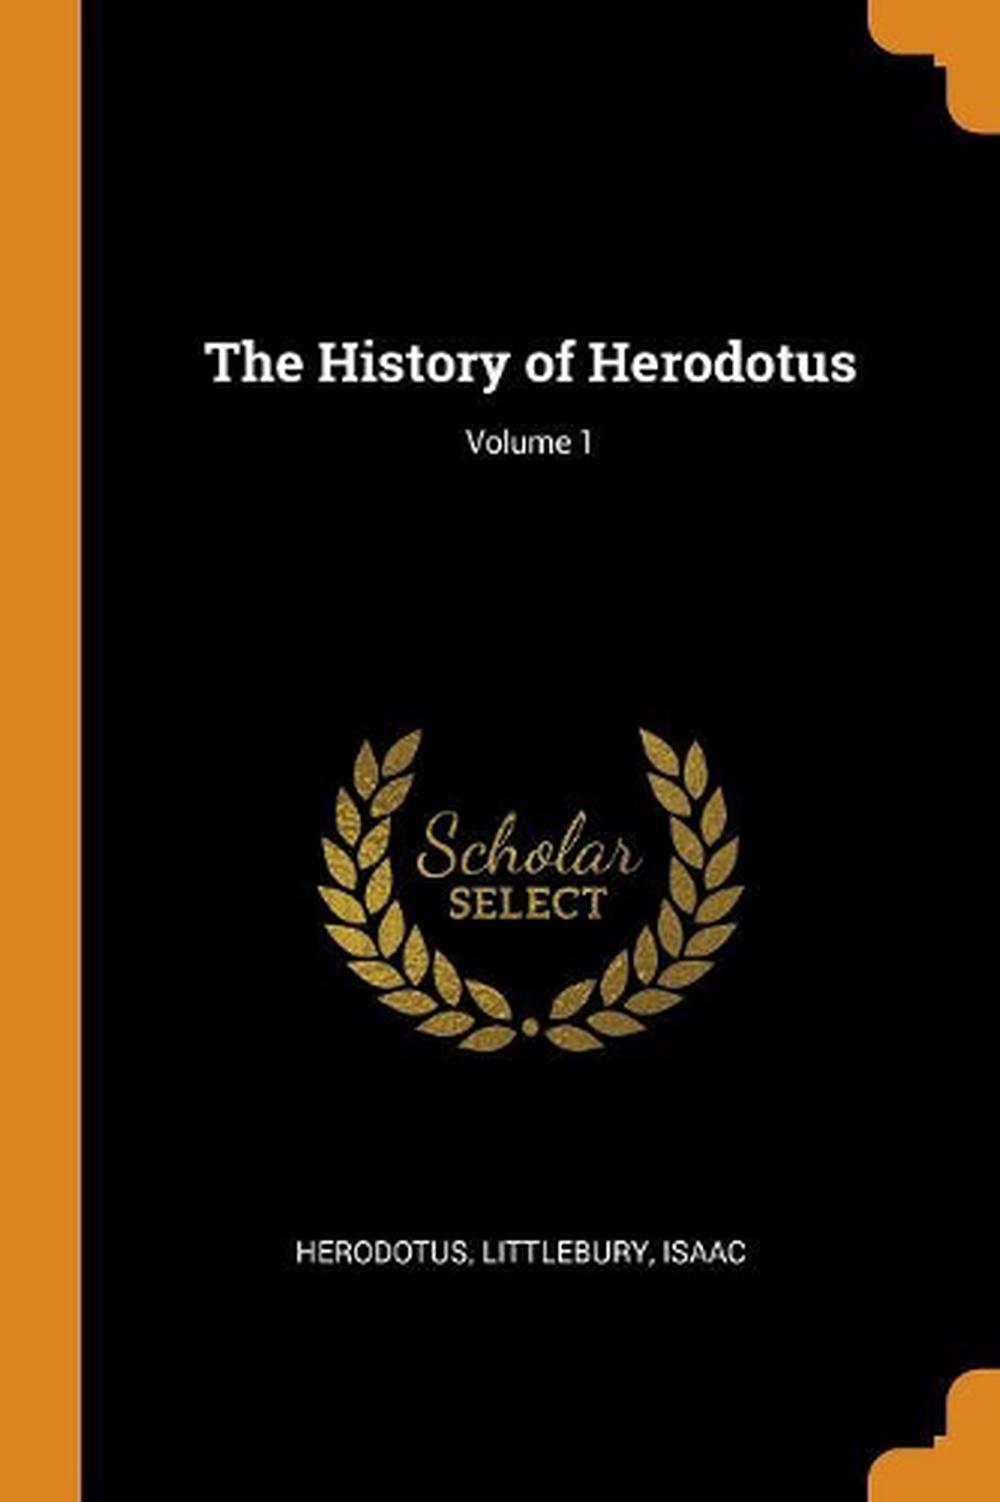 The Histories by Herodotus Translated By Aub...